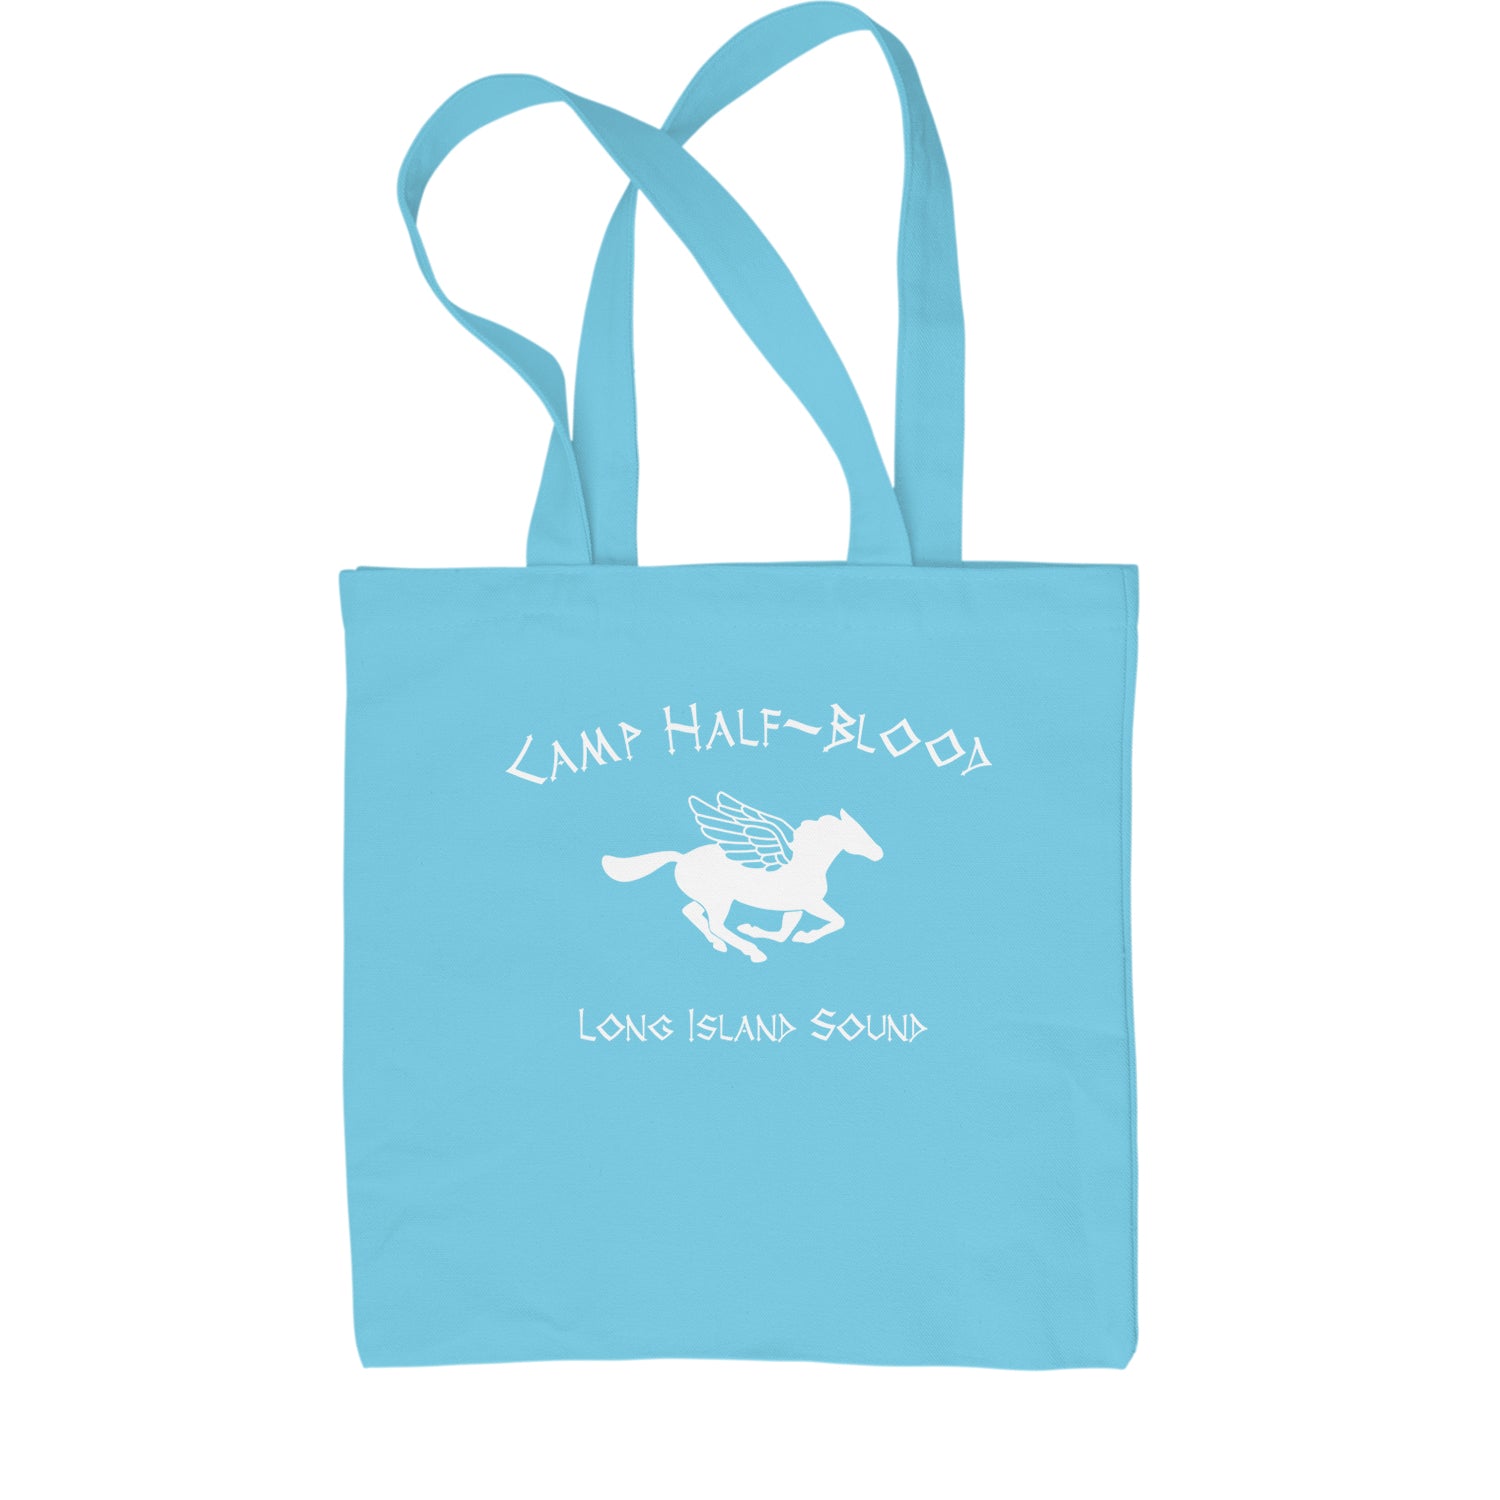 Camp Half Blood Long Island Sound Shopping Tote Bag and, apollo, blood, camp, half, jackson, jupiter, olympians, percy, the by Expression Tees